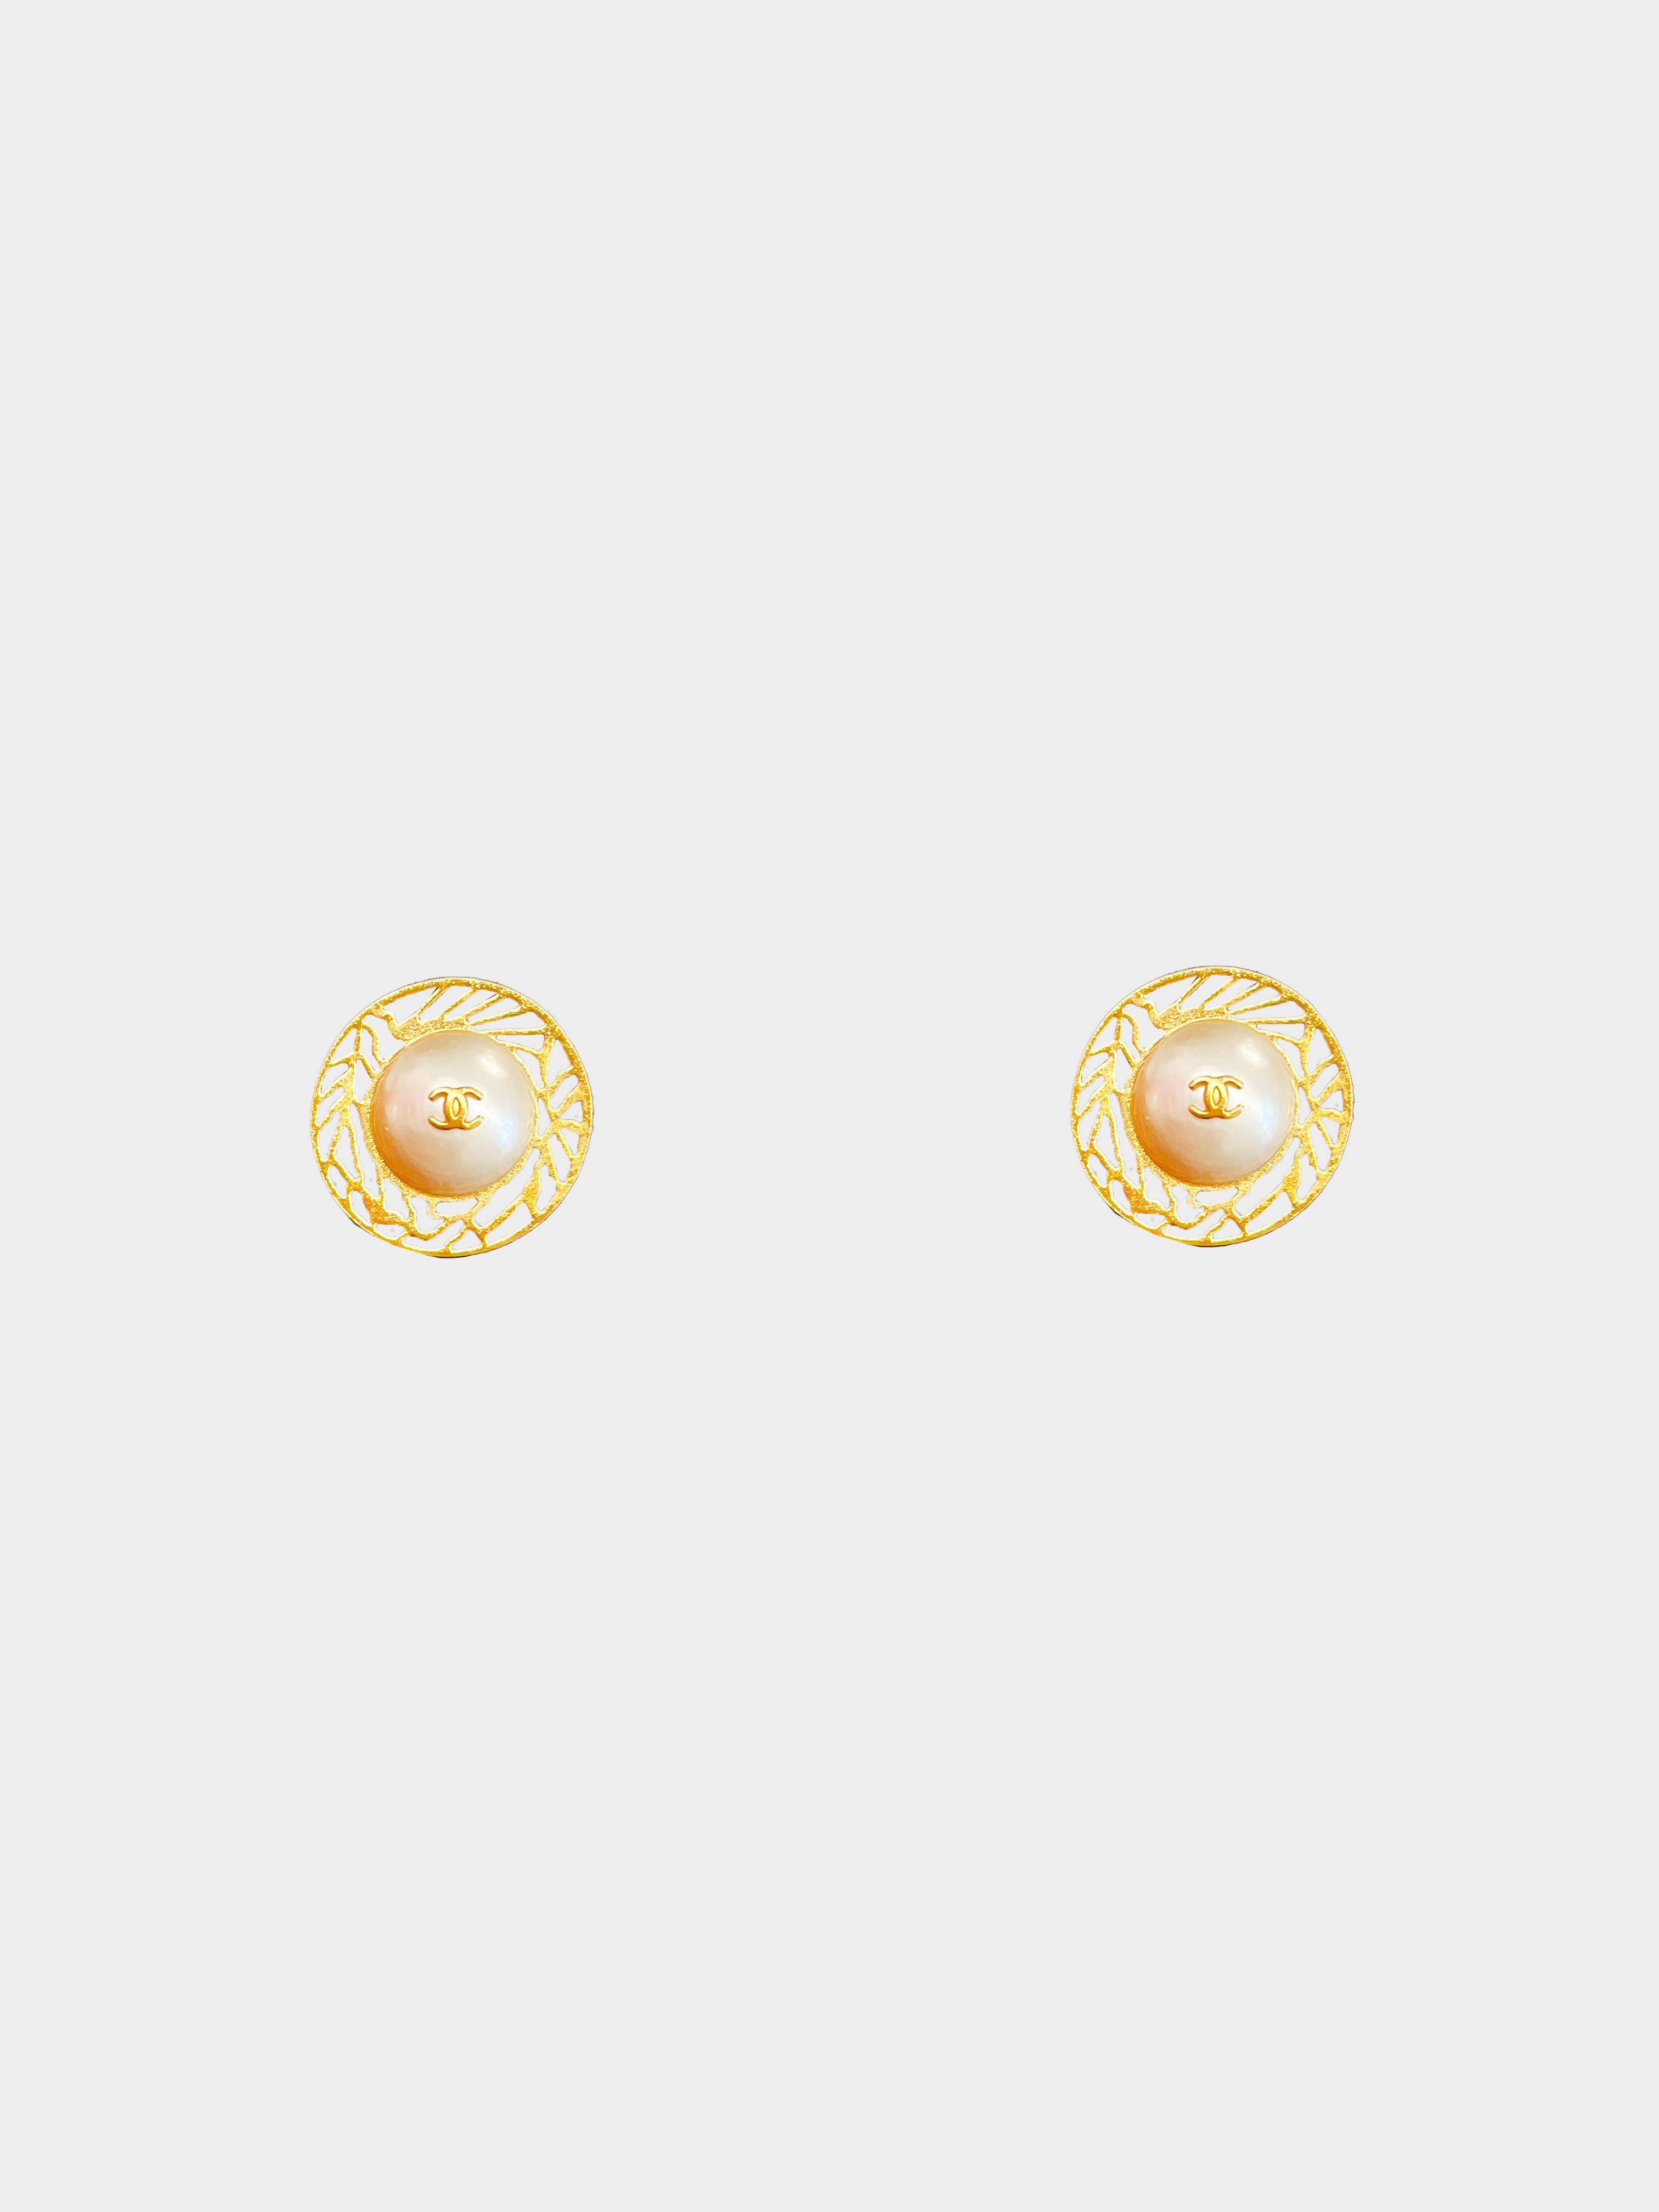 Chanel Spring 1997 Pearl Cut Out Earrings